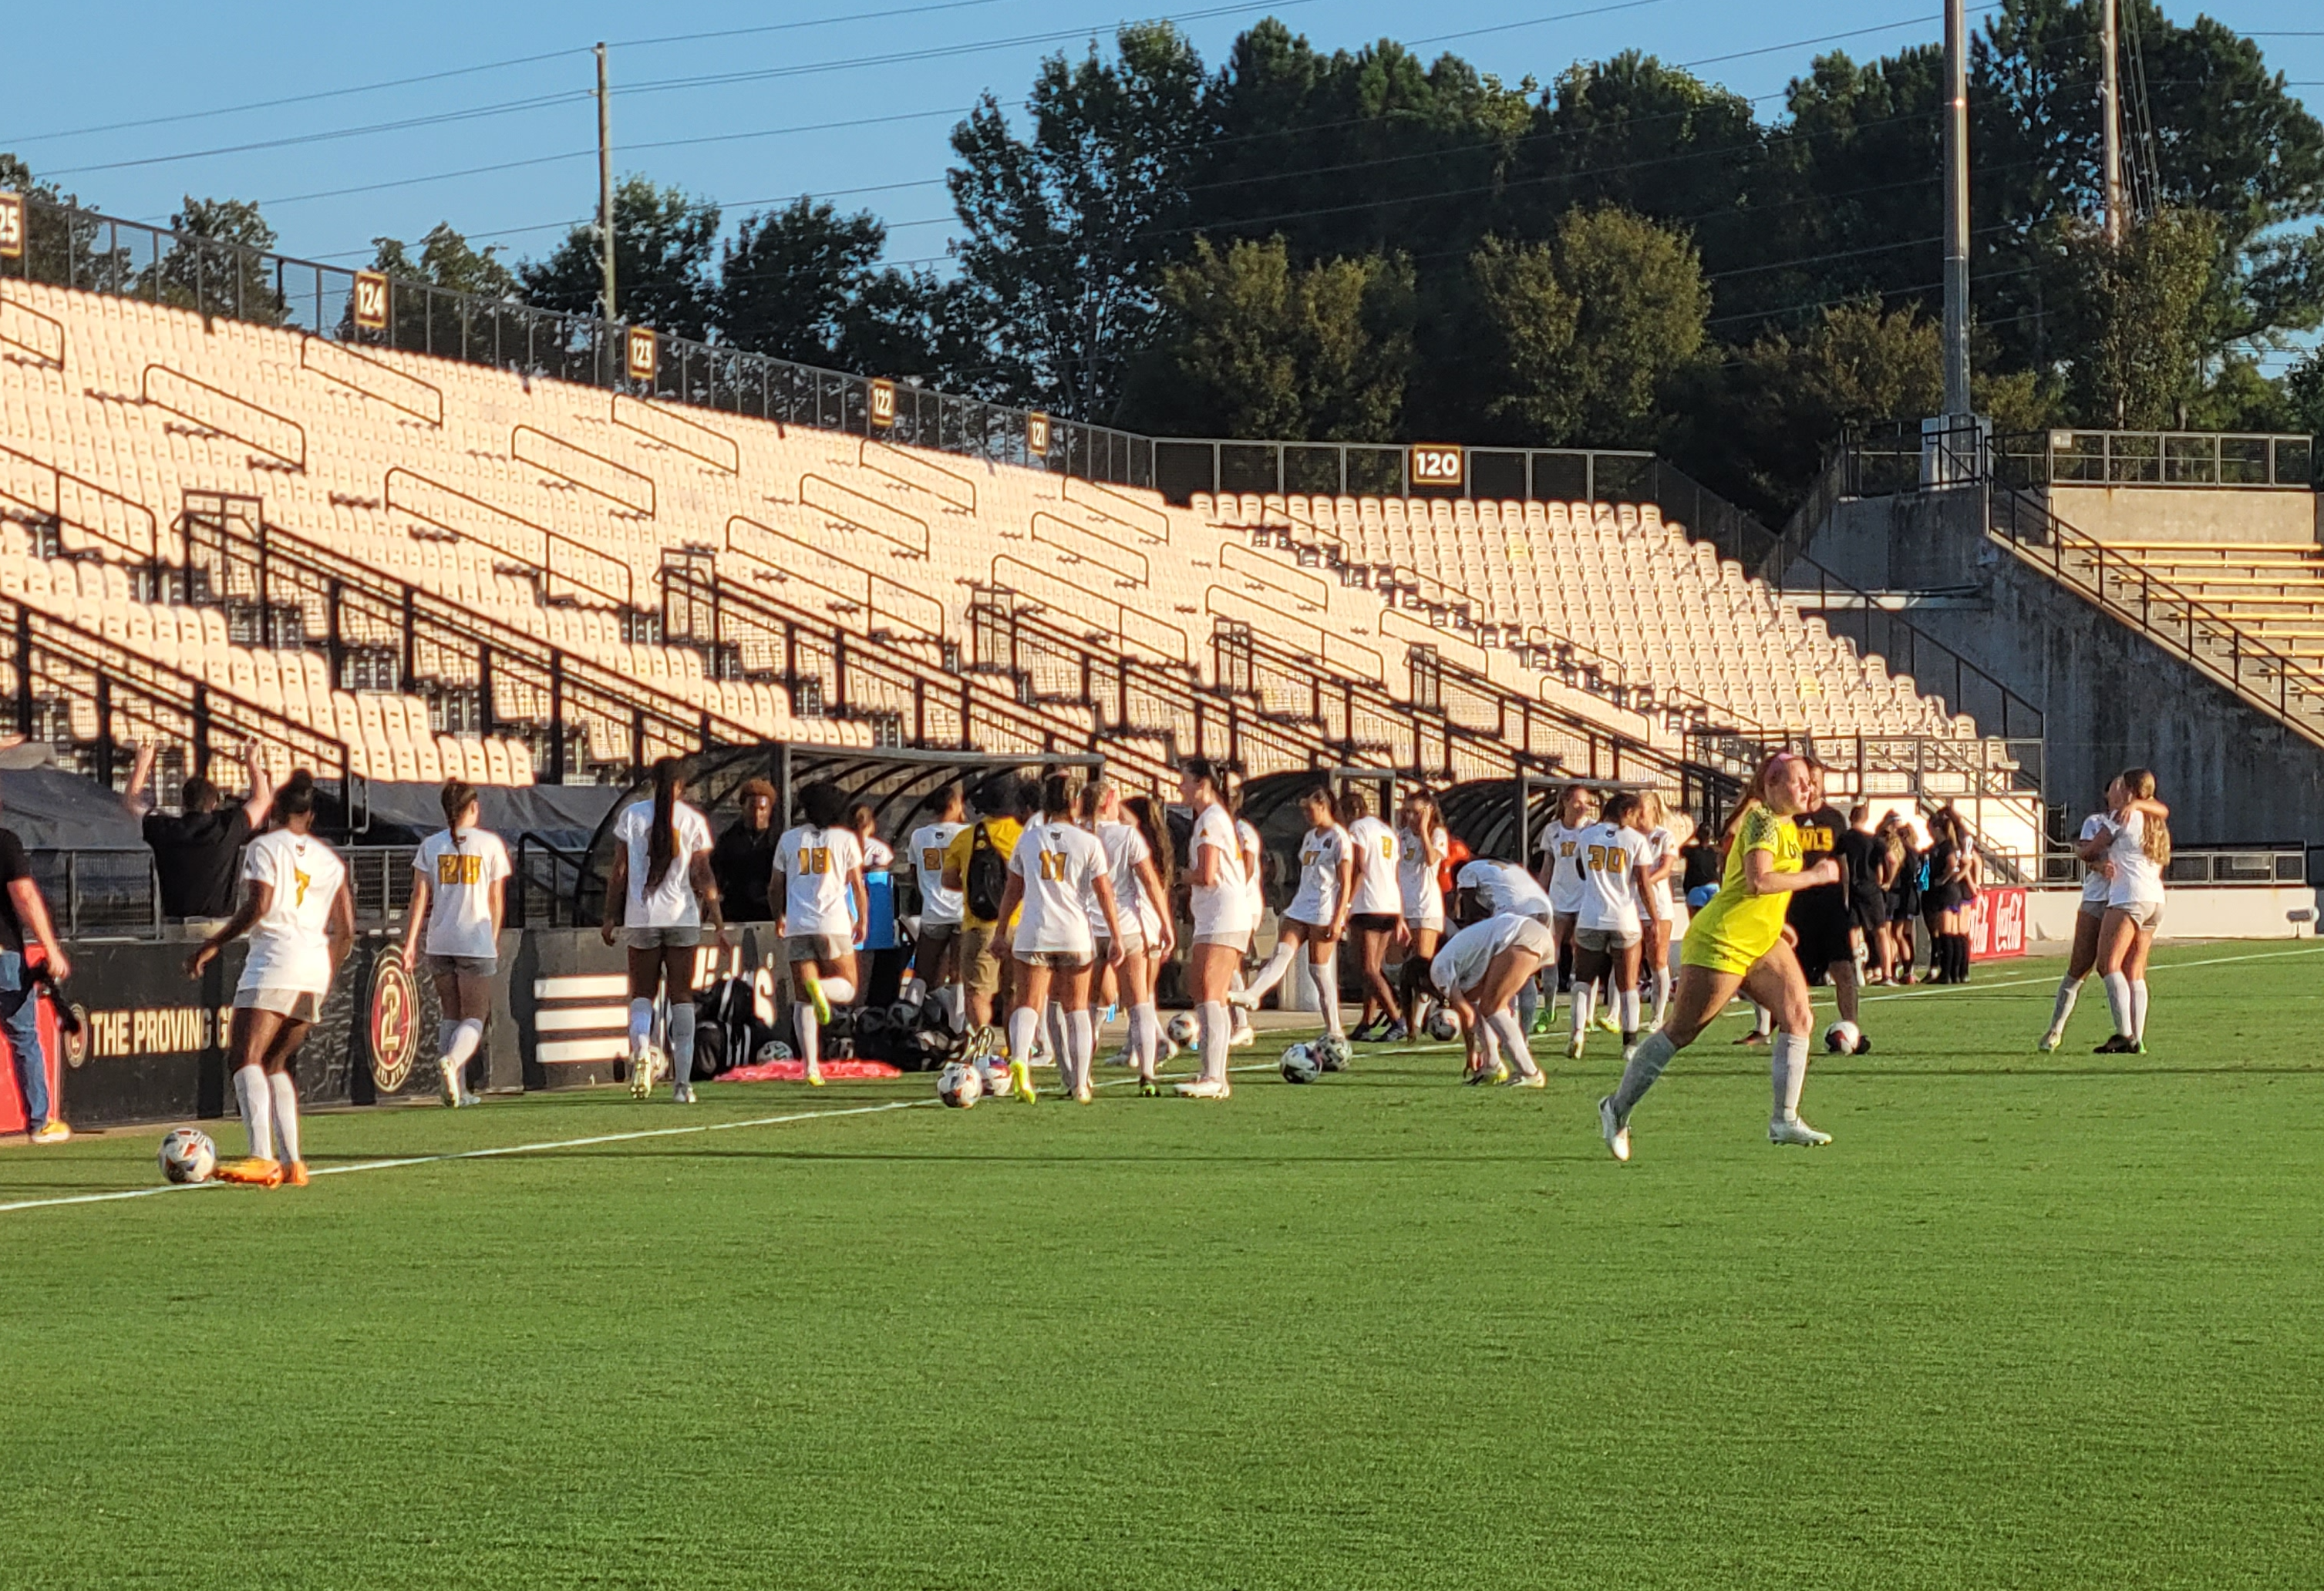 The Kennesaw women's soccer team at their game against Georgia State.